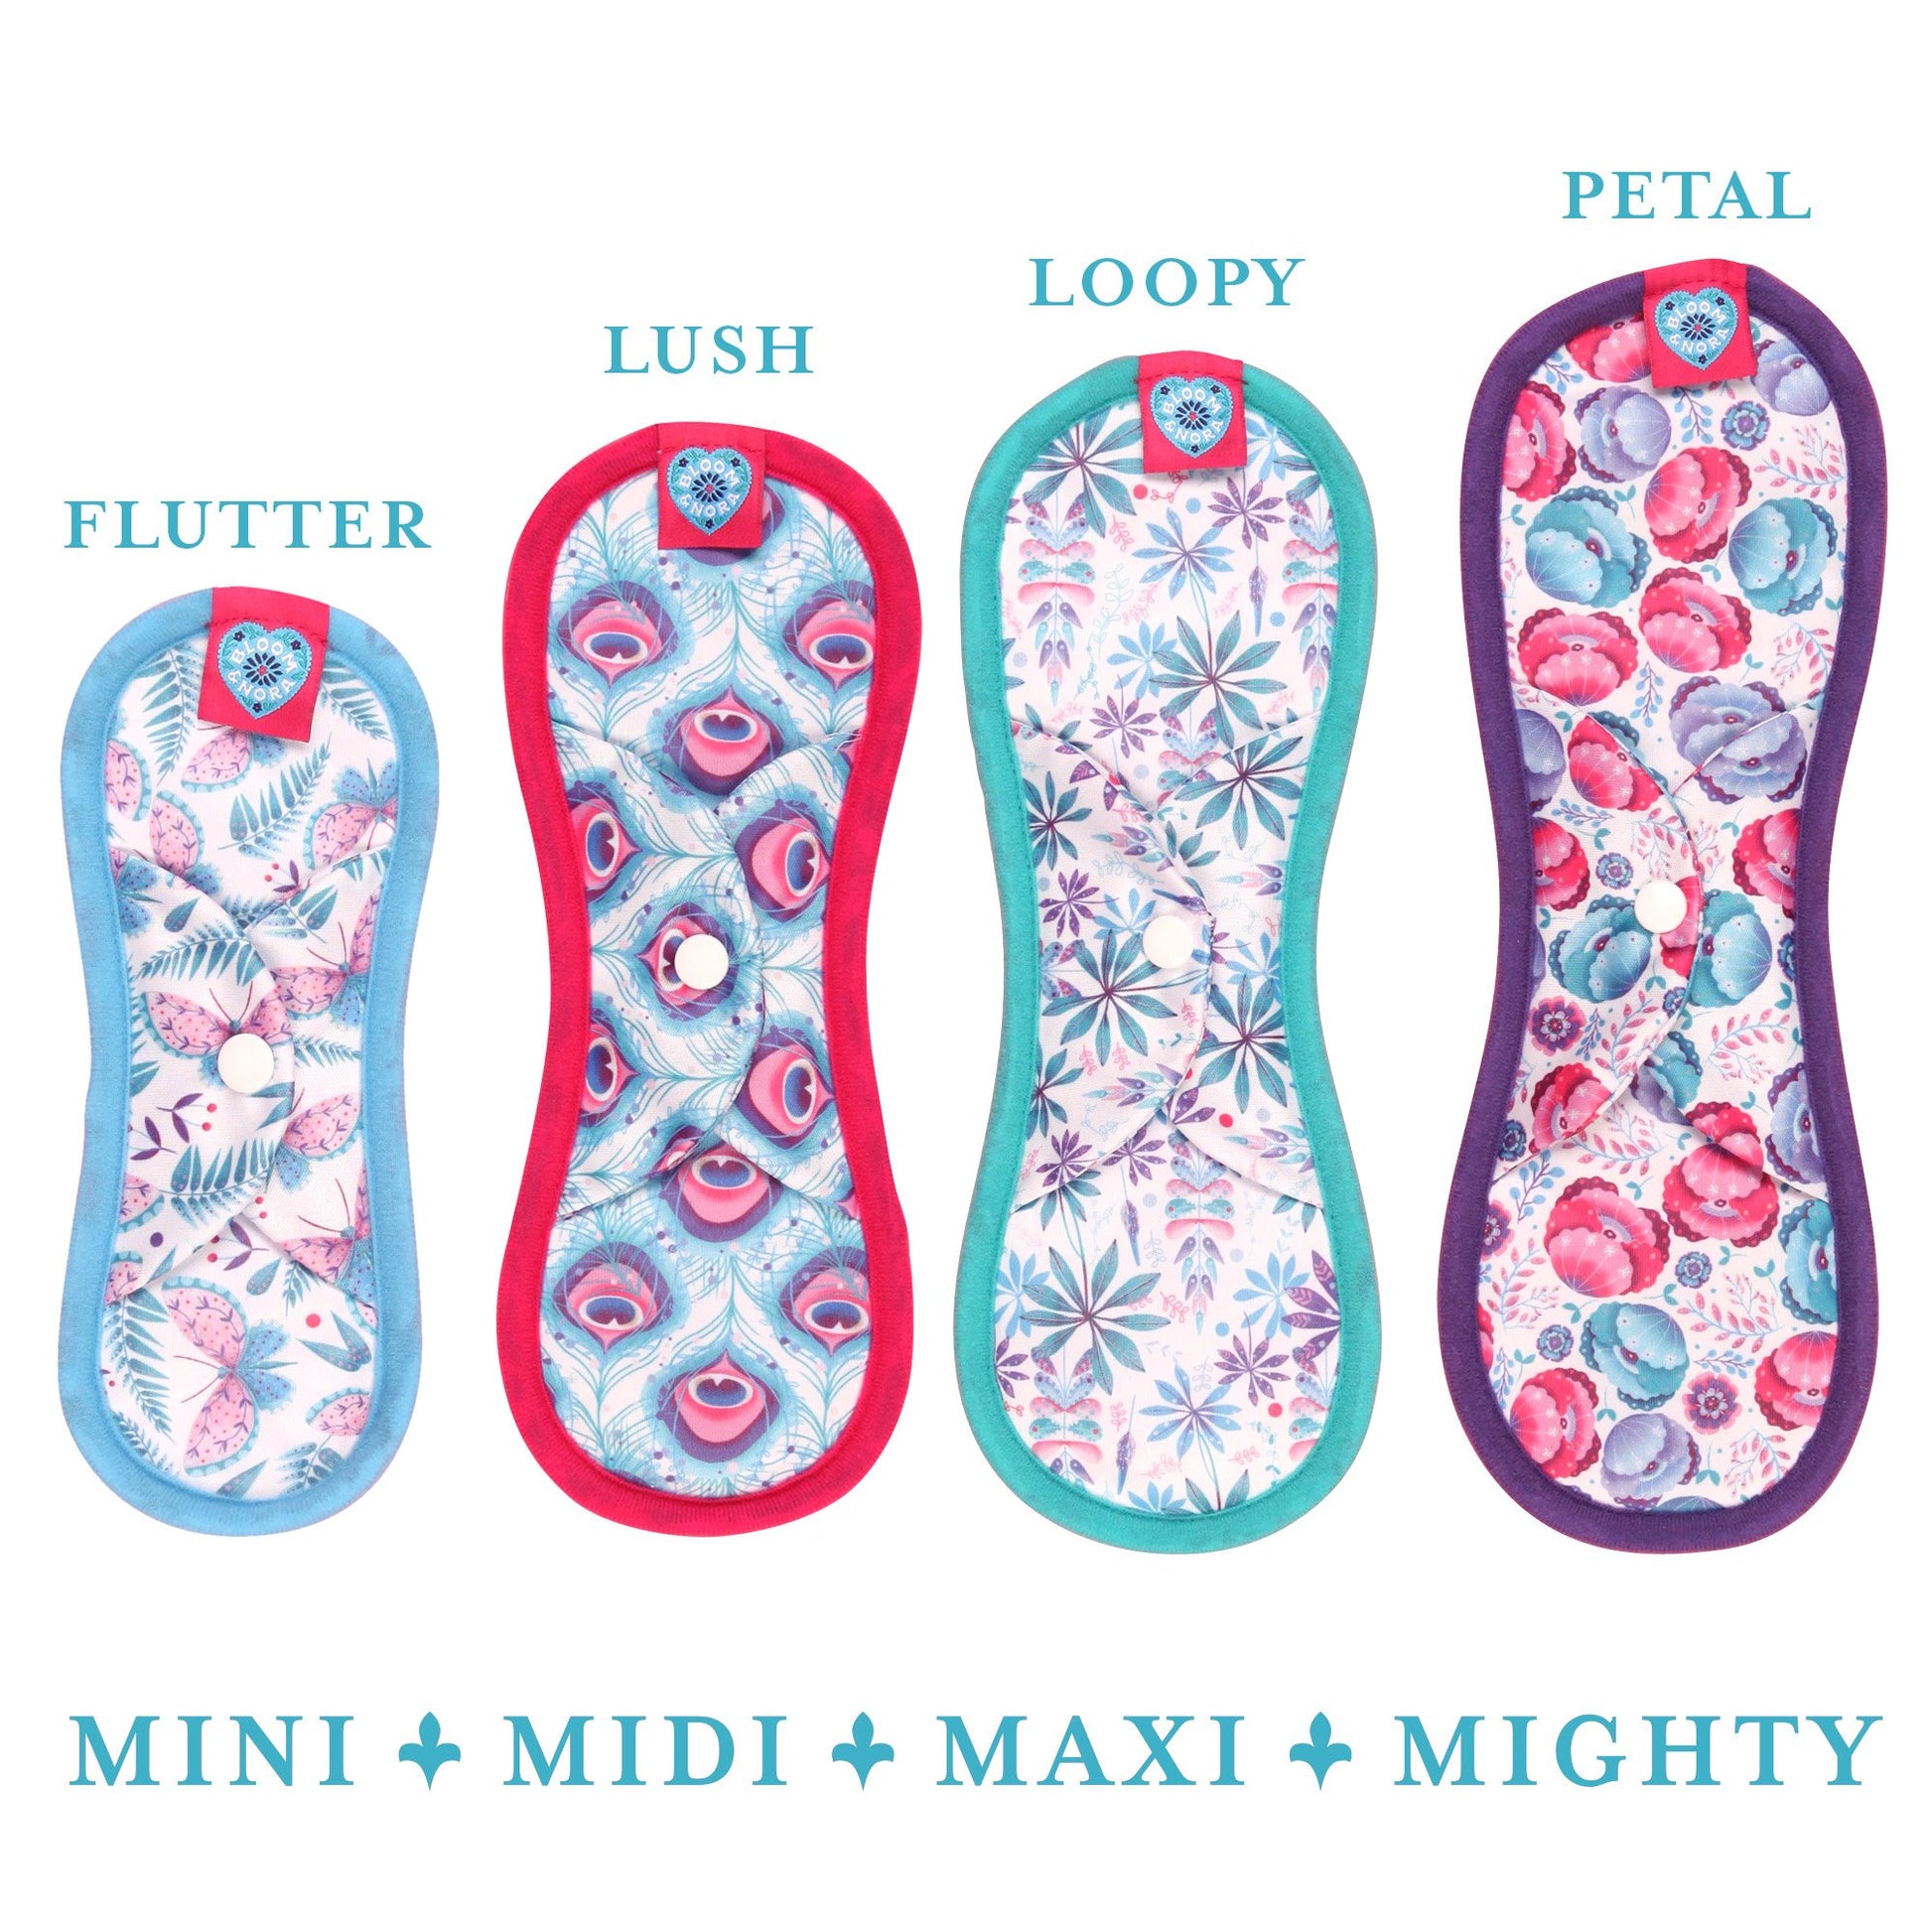 Bloom & Nora Reusable Cloth Sanitary Pad Size & Flow Chart